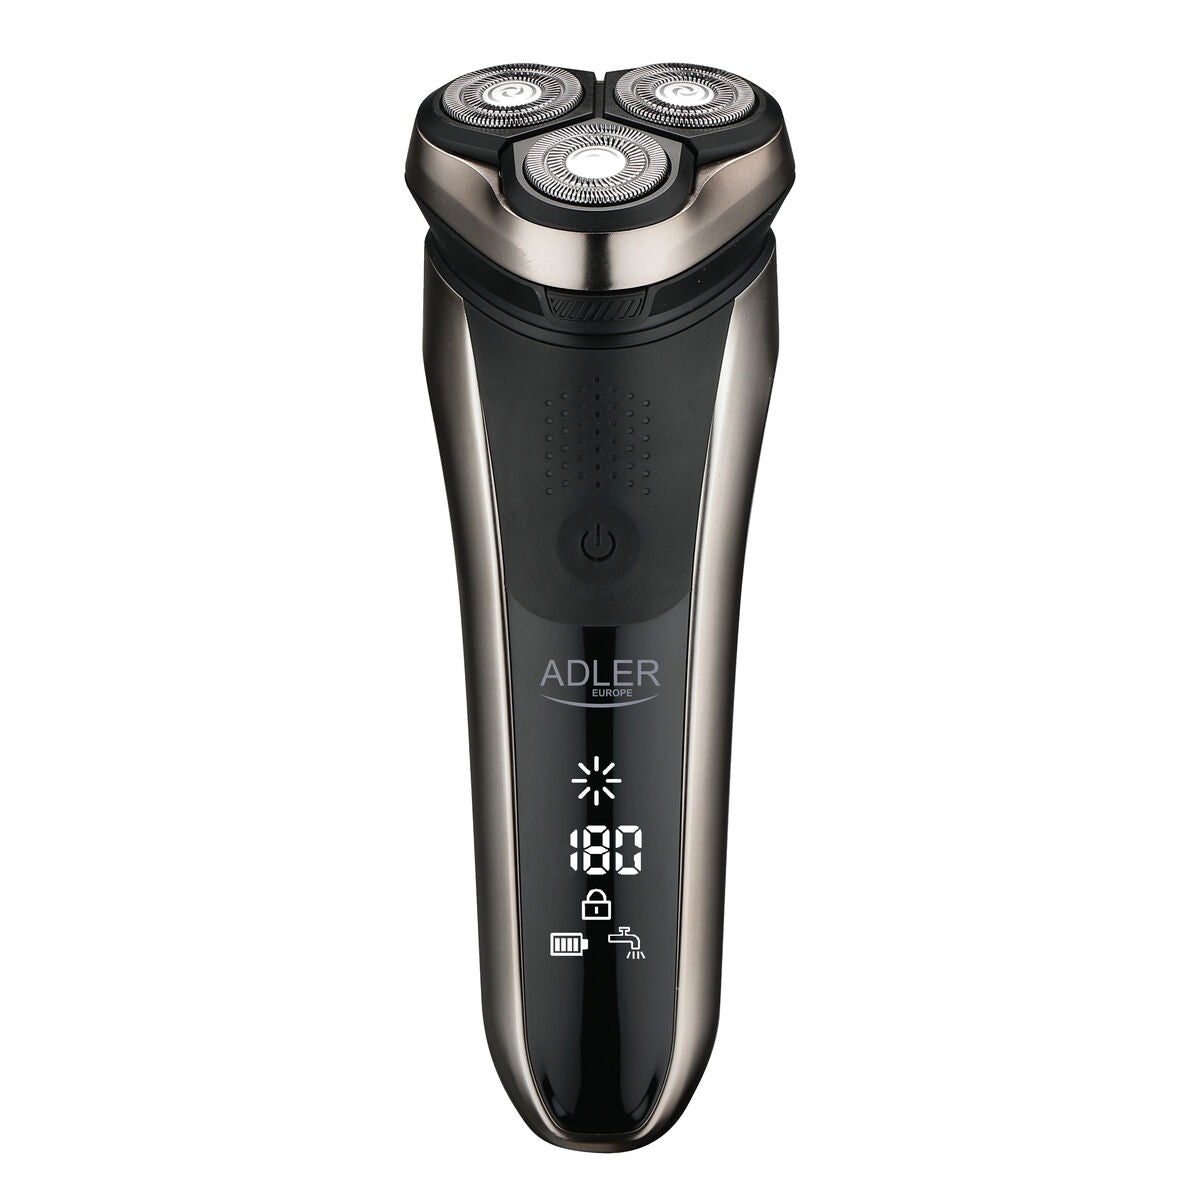 Electric shaver Adler AD 2933 - Calm Beauty IE